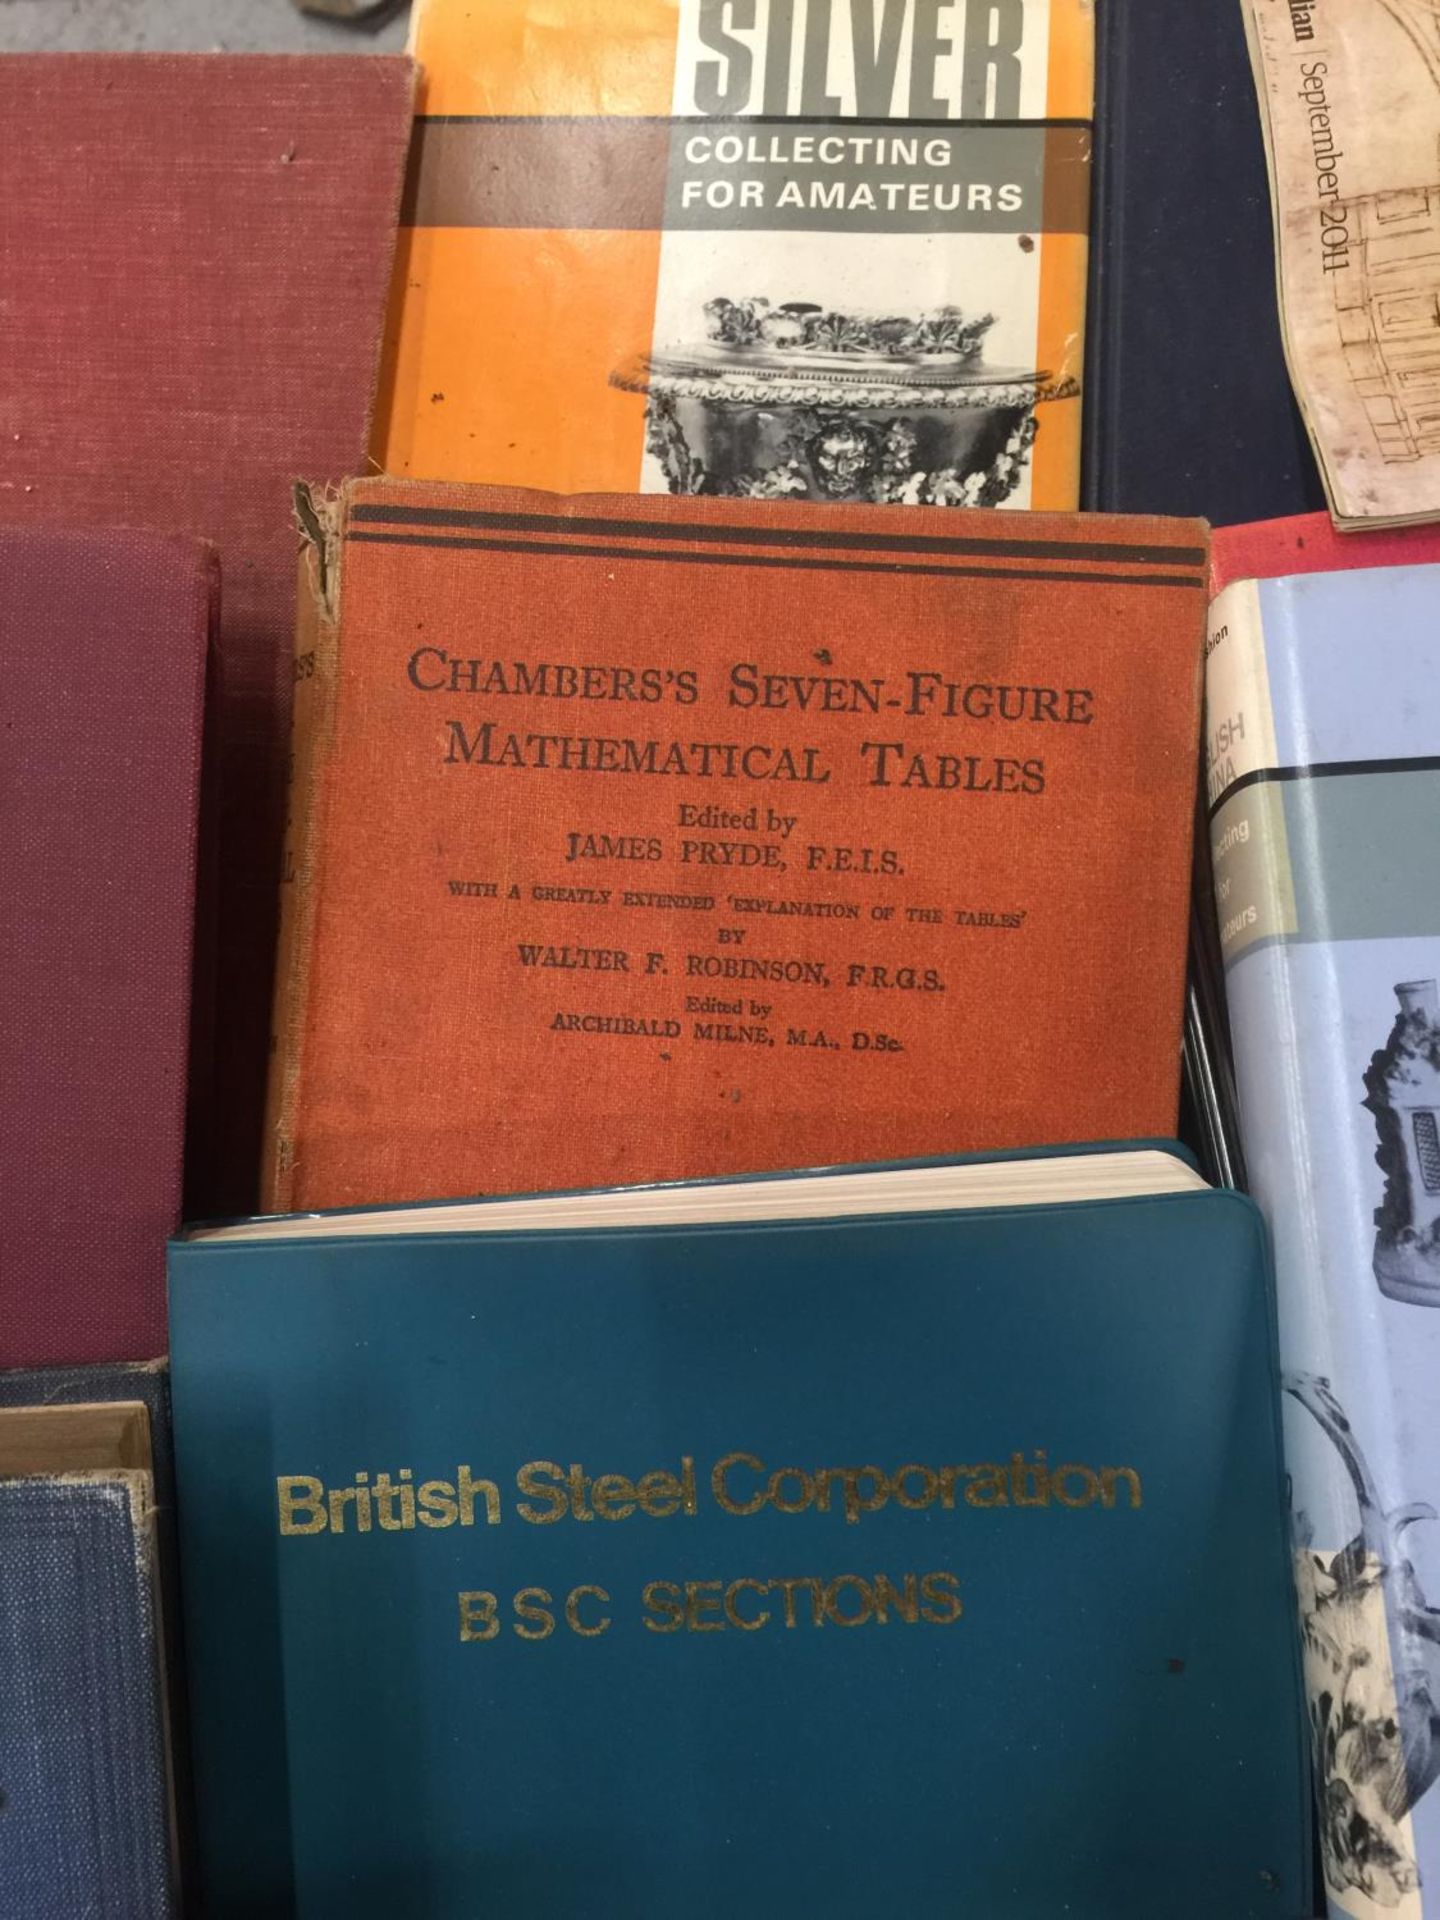 A QUANTITY OF HARDBACK BOOKS ON SURVEYING, MECHANICS, CHAMBER'S MATHMATICAL TABLES, THEORY OF - Image 5 of 5